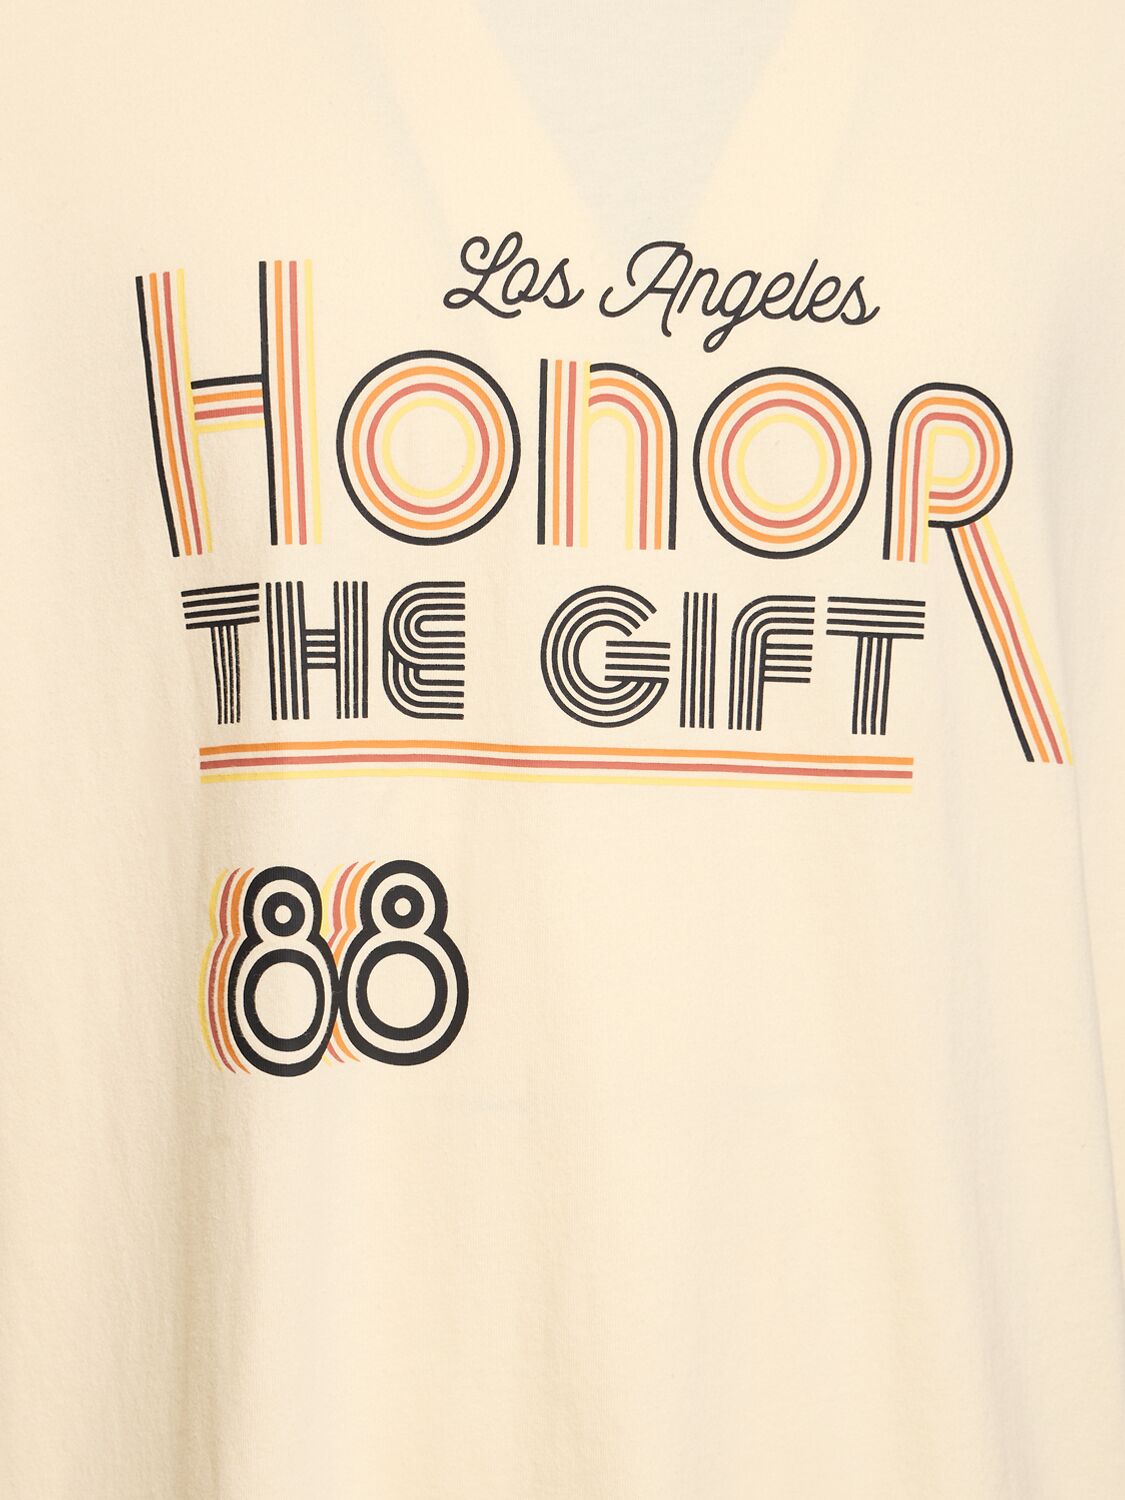 Shop Honor The Gift A-spring Retro Honor Cotton T-shirt In Tan